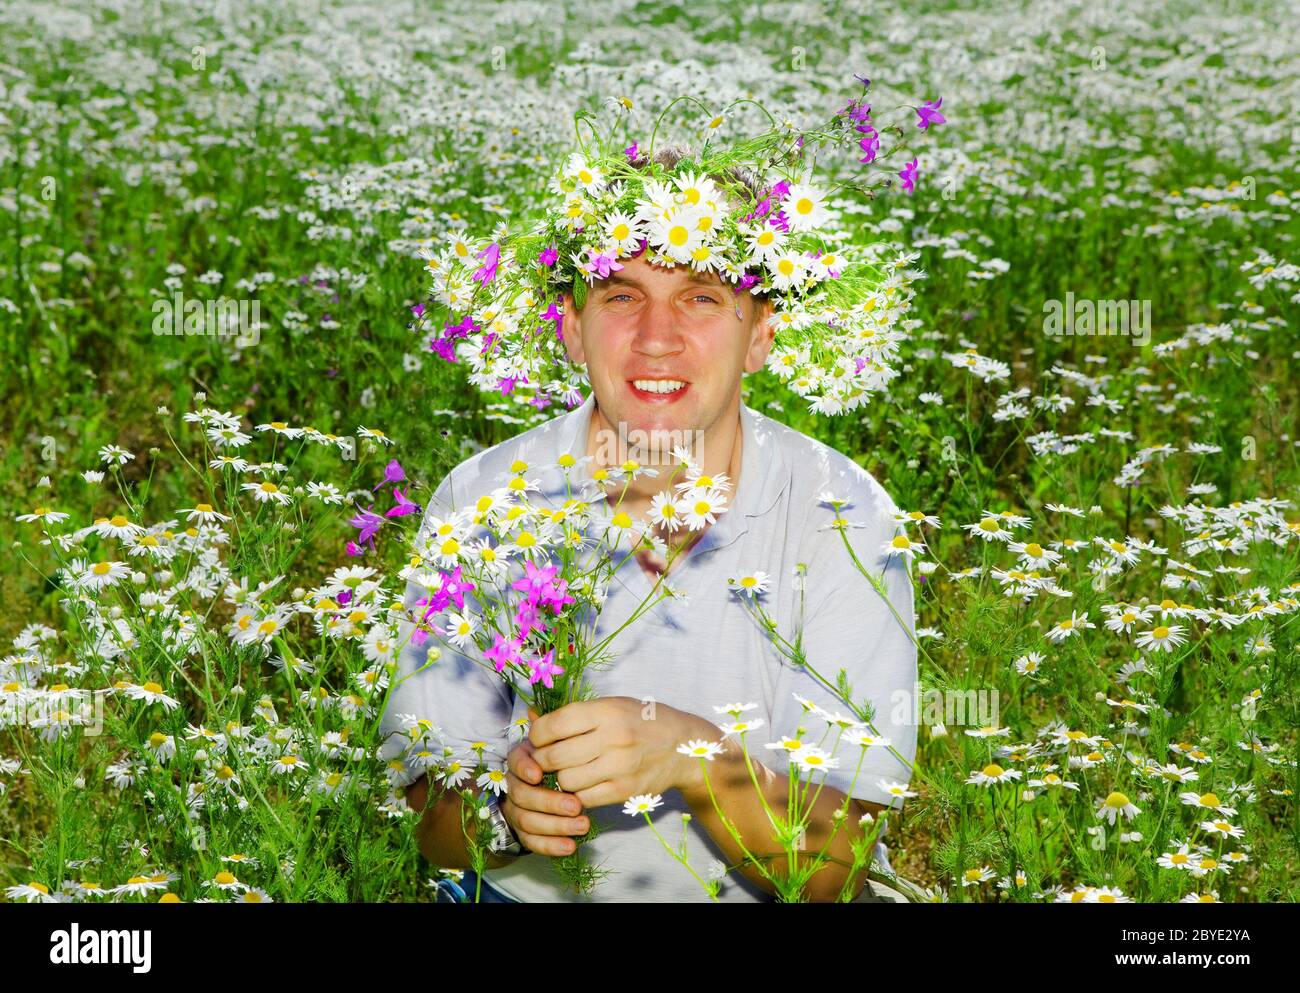 The smiling man in a wreath from wild flowers in Stock Photo